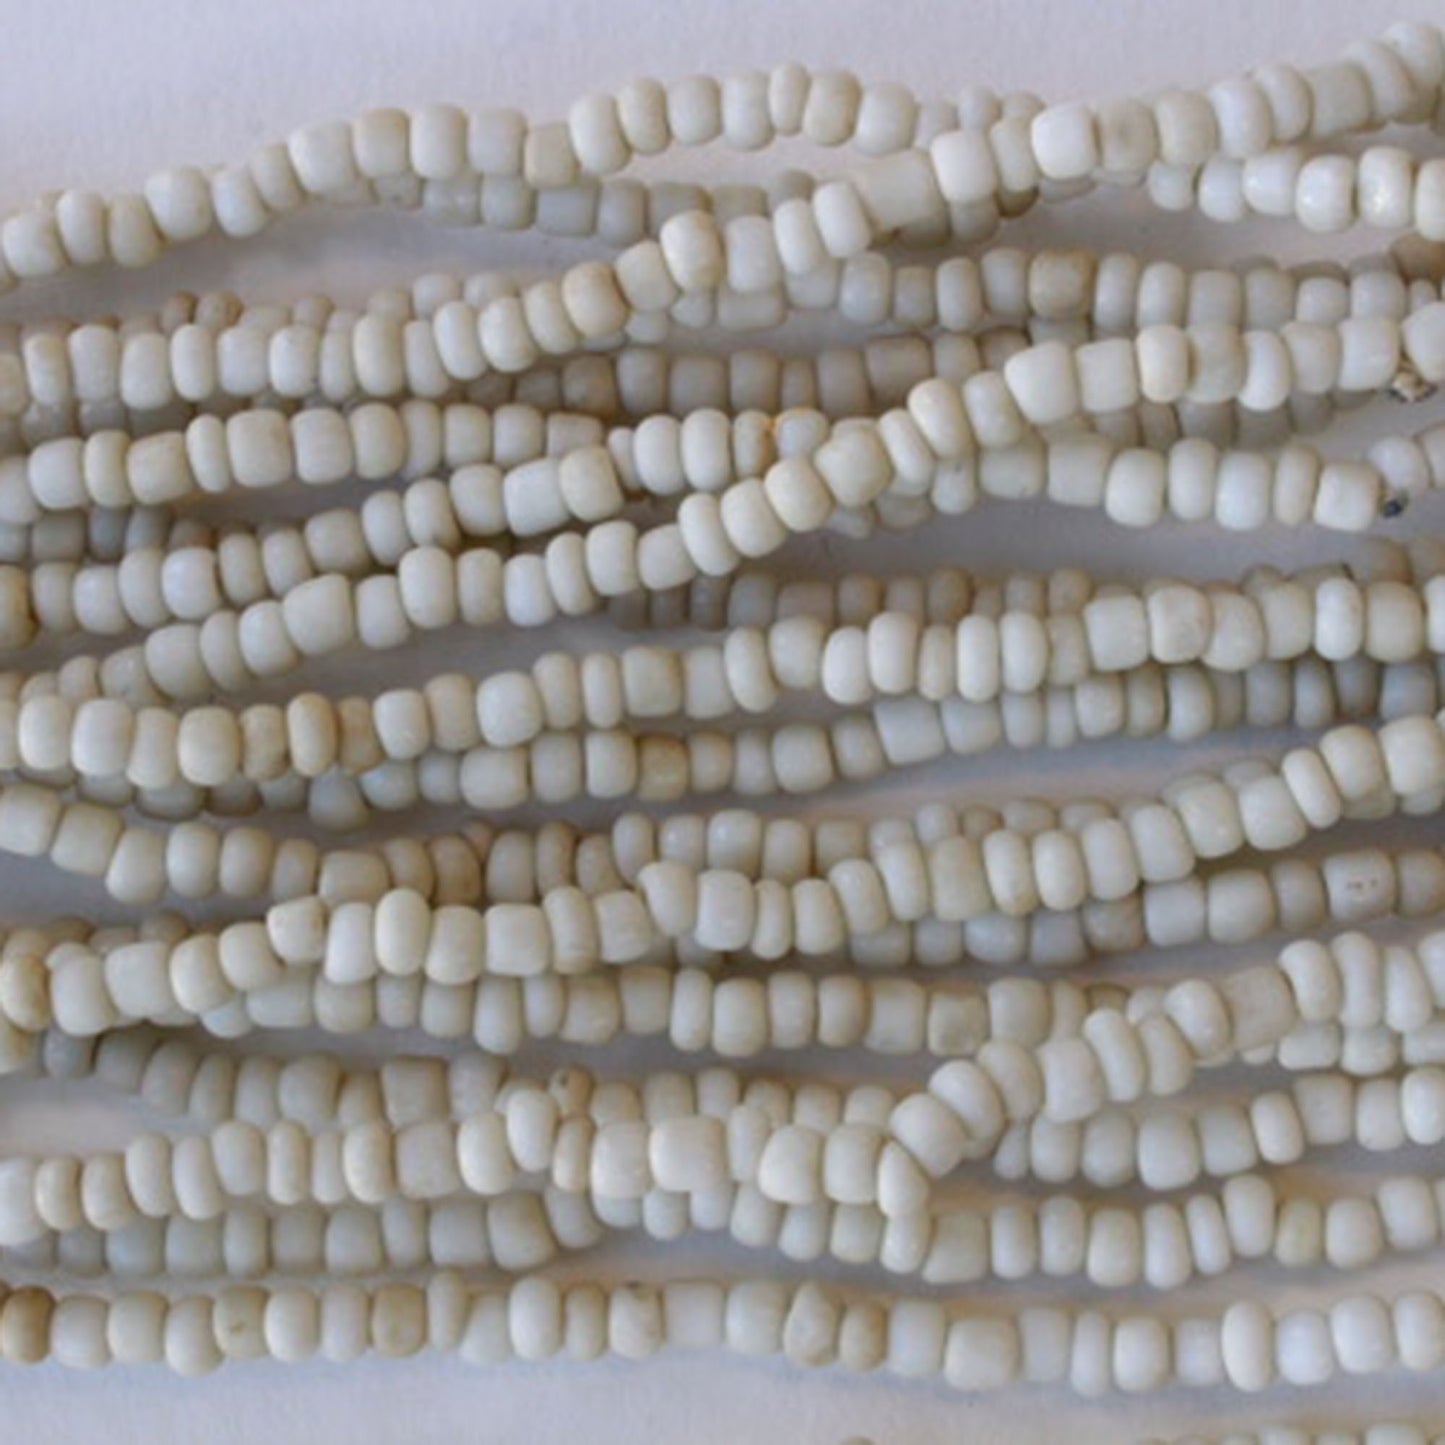 Rustic Indonesian Seed Beads - Ivory White - 42 inches